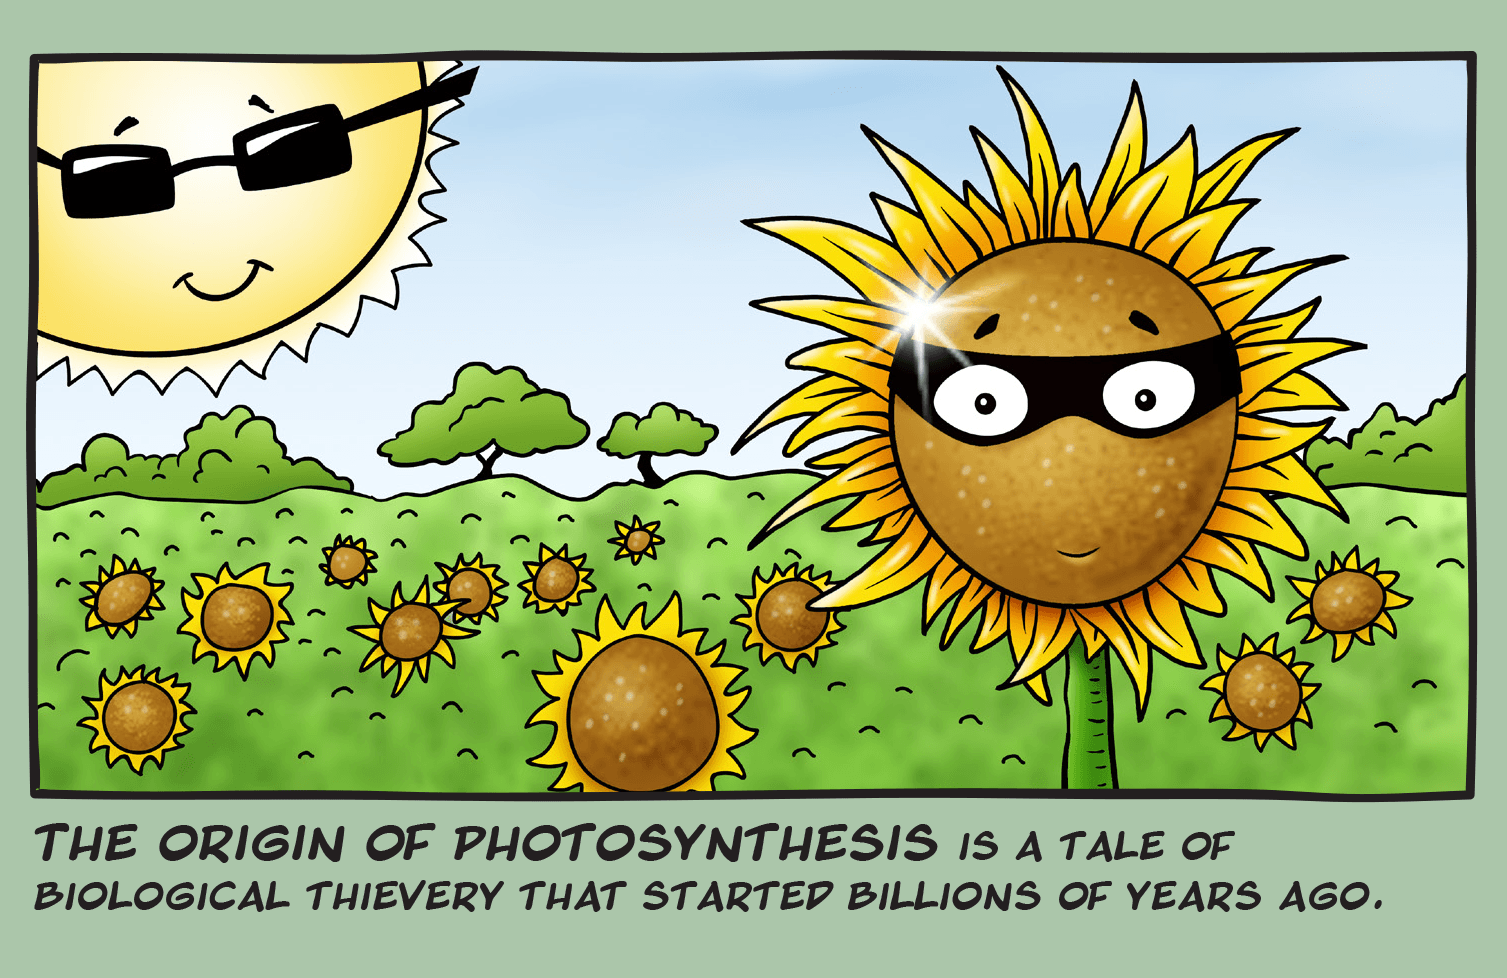 The origin of photosynthesis is a tale of biological thievery that started billions of years ago